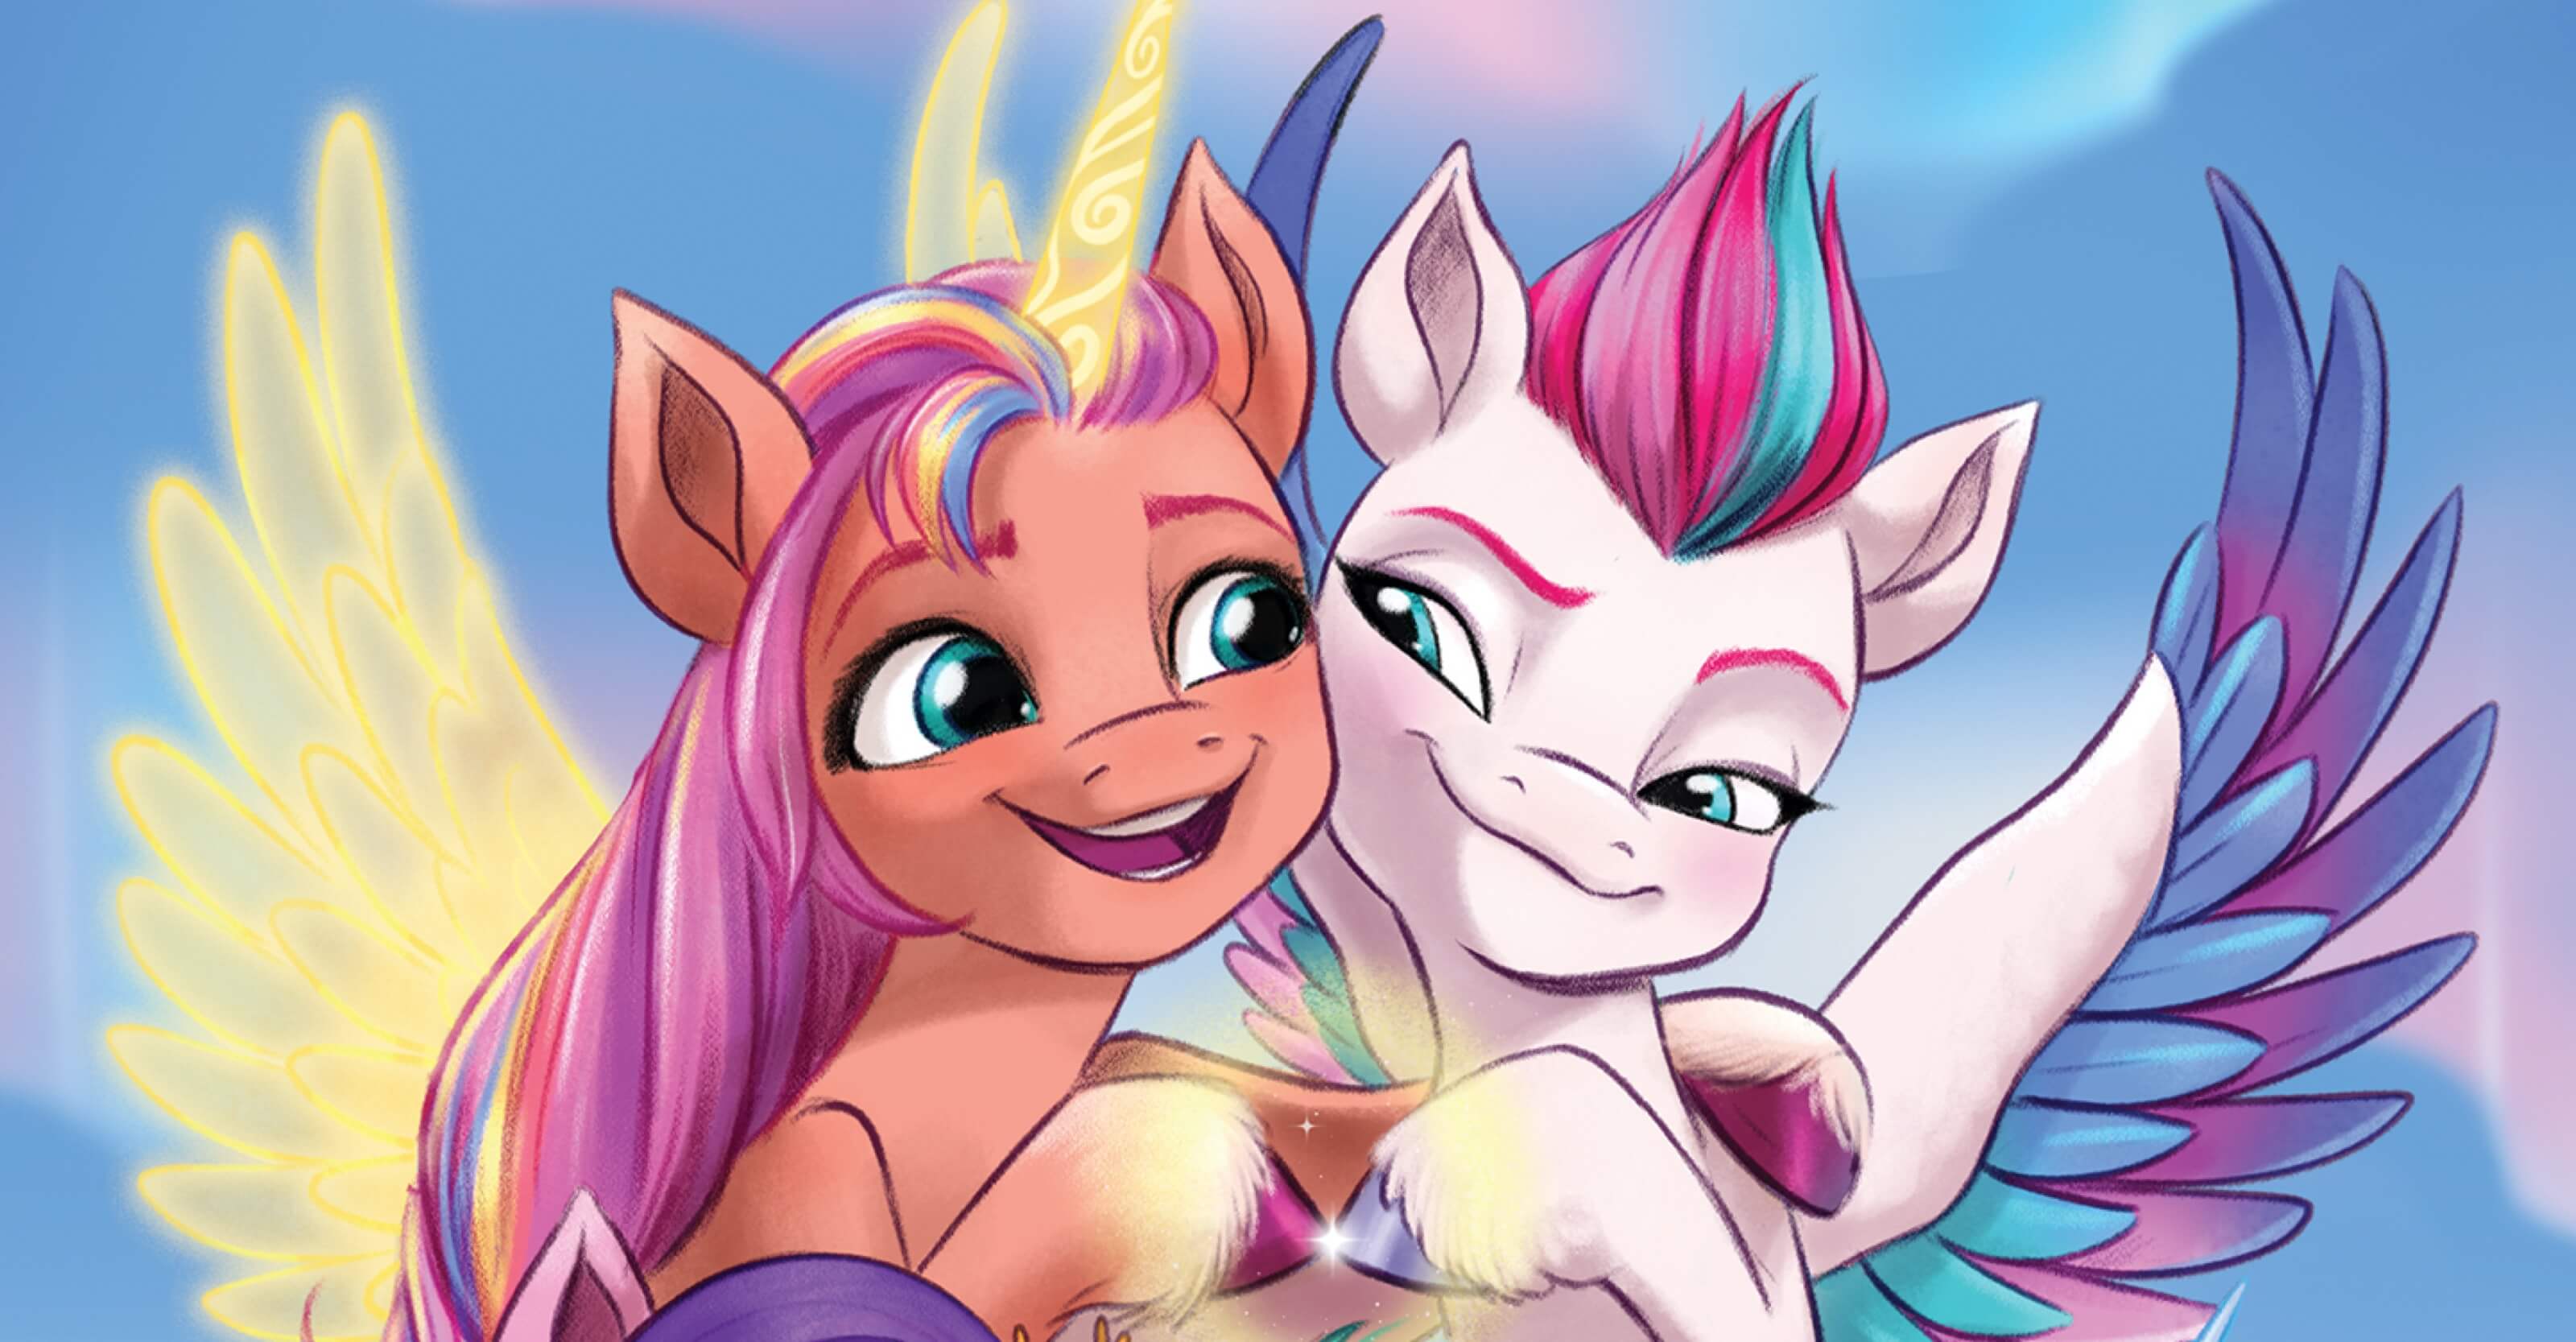 A New Generation of My Little Pony Sparkles in All-New Comic Book from IDW